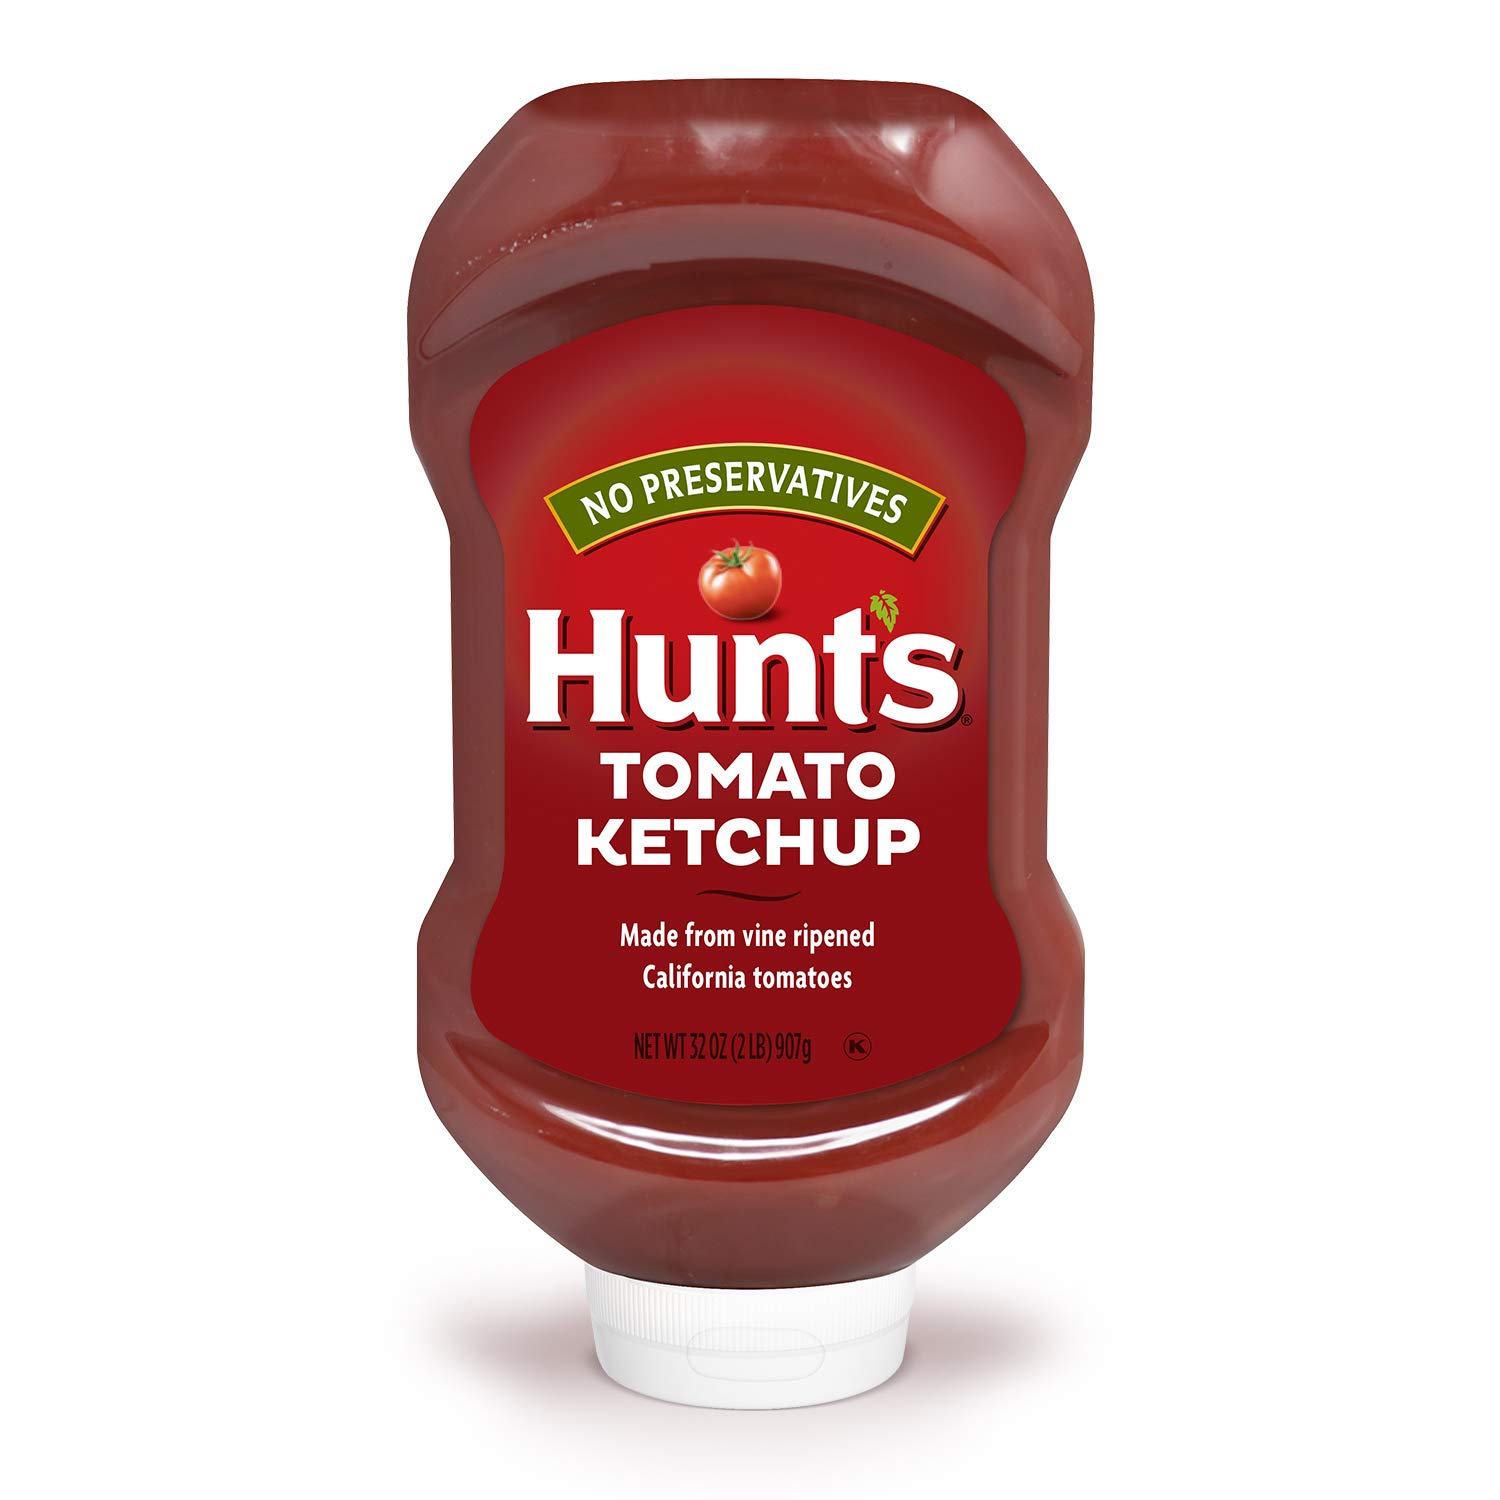 32-oz Hunt's Tomato Ketchup Squeeze Bottle $1.52 w/ 15% Subscribe & Save